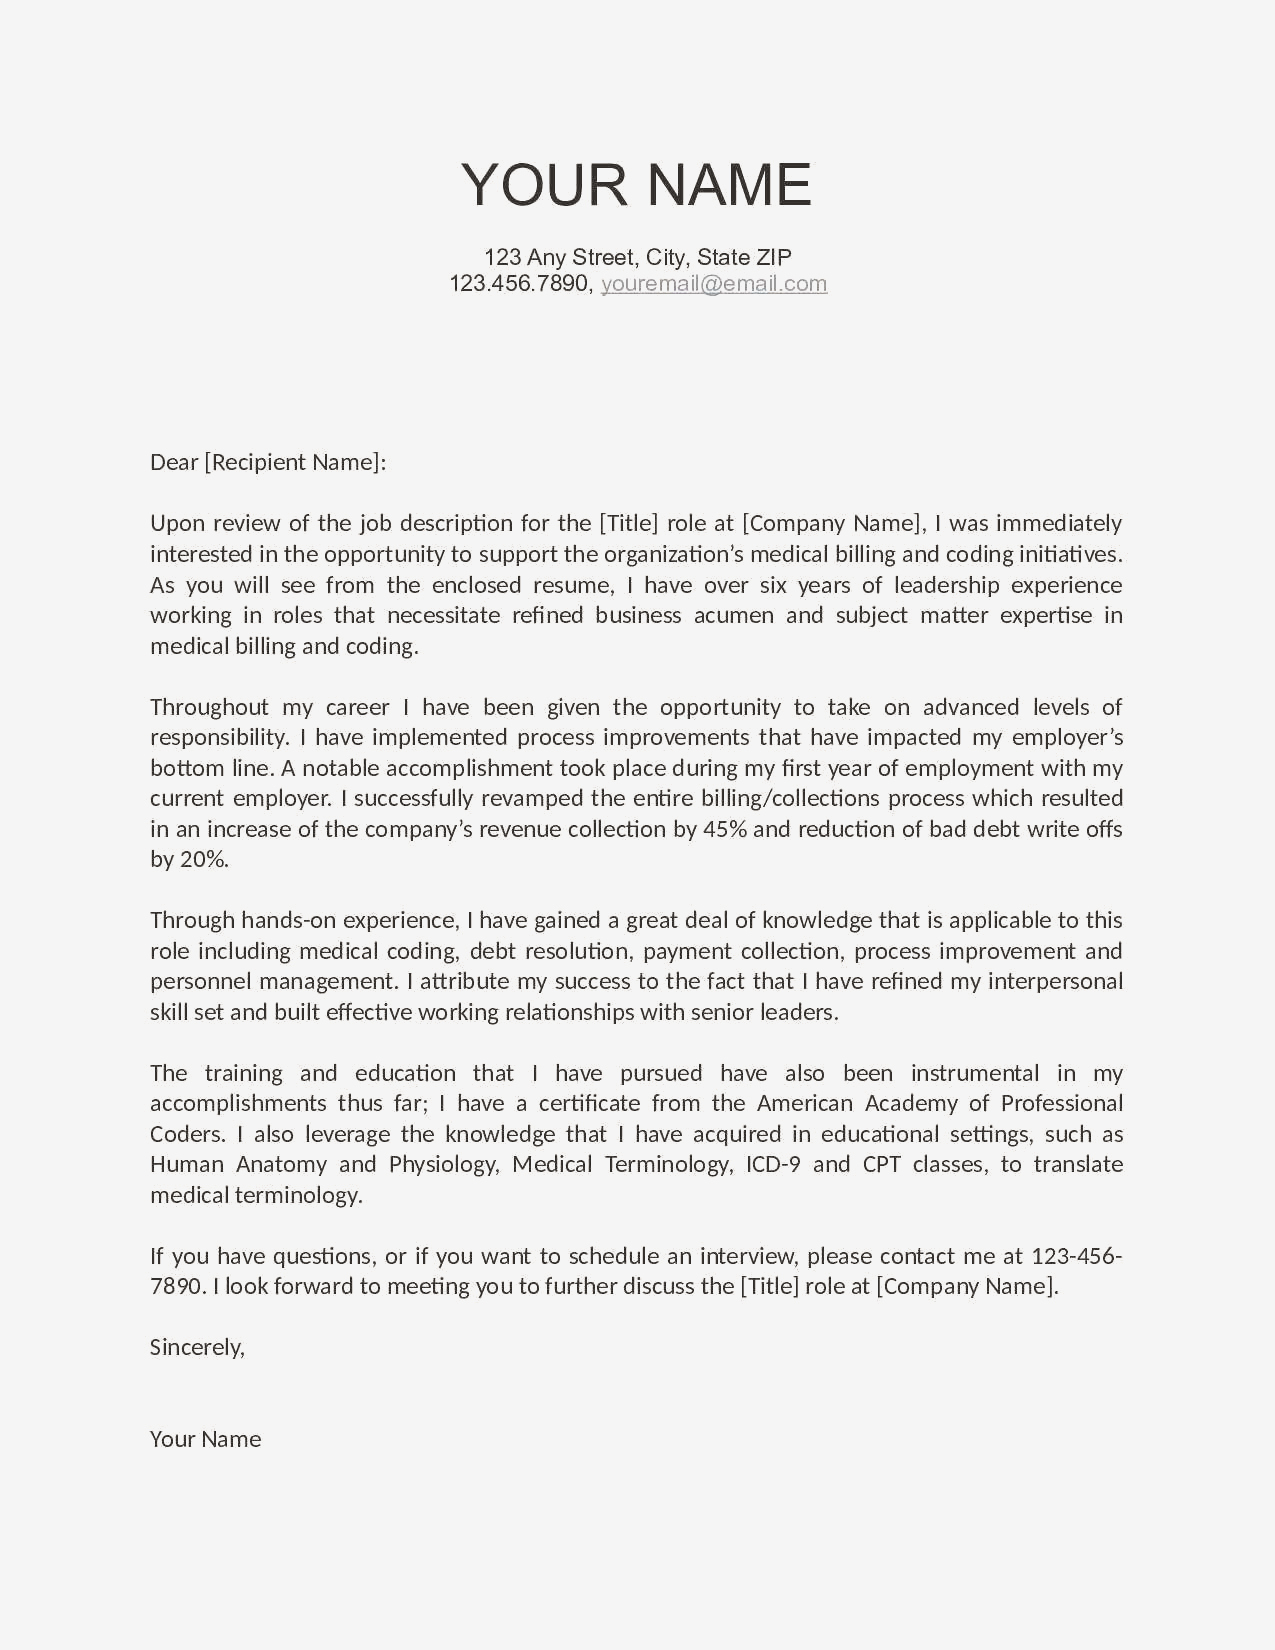 Cover Letter Designs  43 Beautiful Cover Letter Consultancy Resume Designs Agricultural